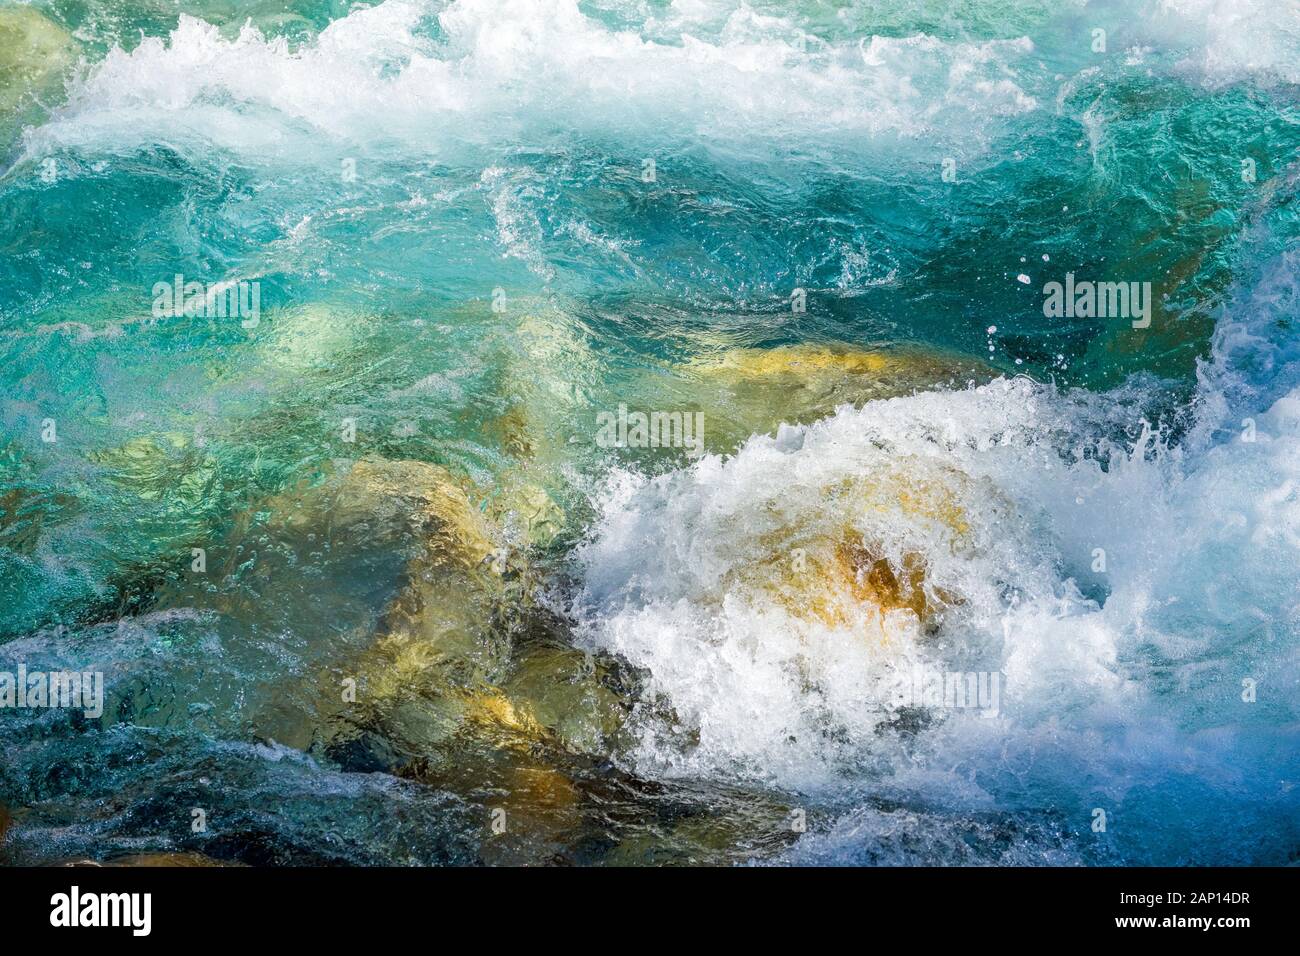 Clear mountain river water tumbling over boulders in the Nepal Himalayas Stock Photo